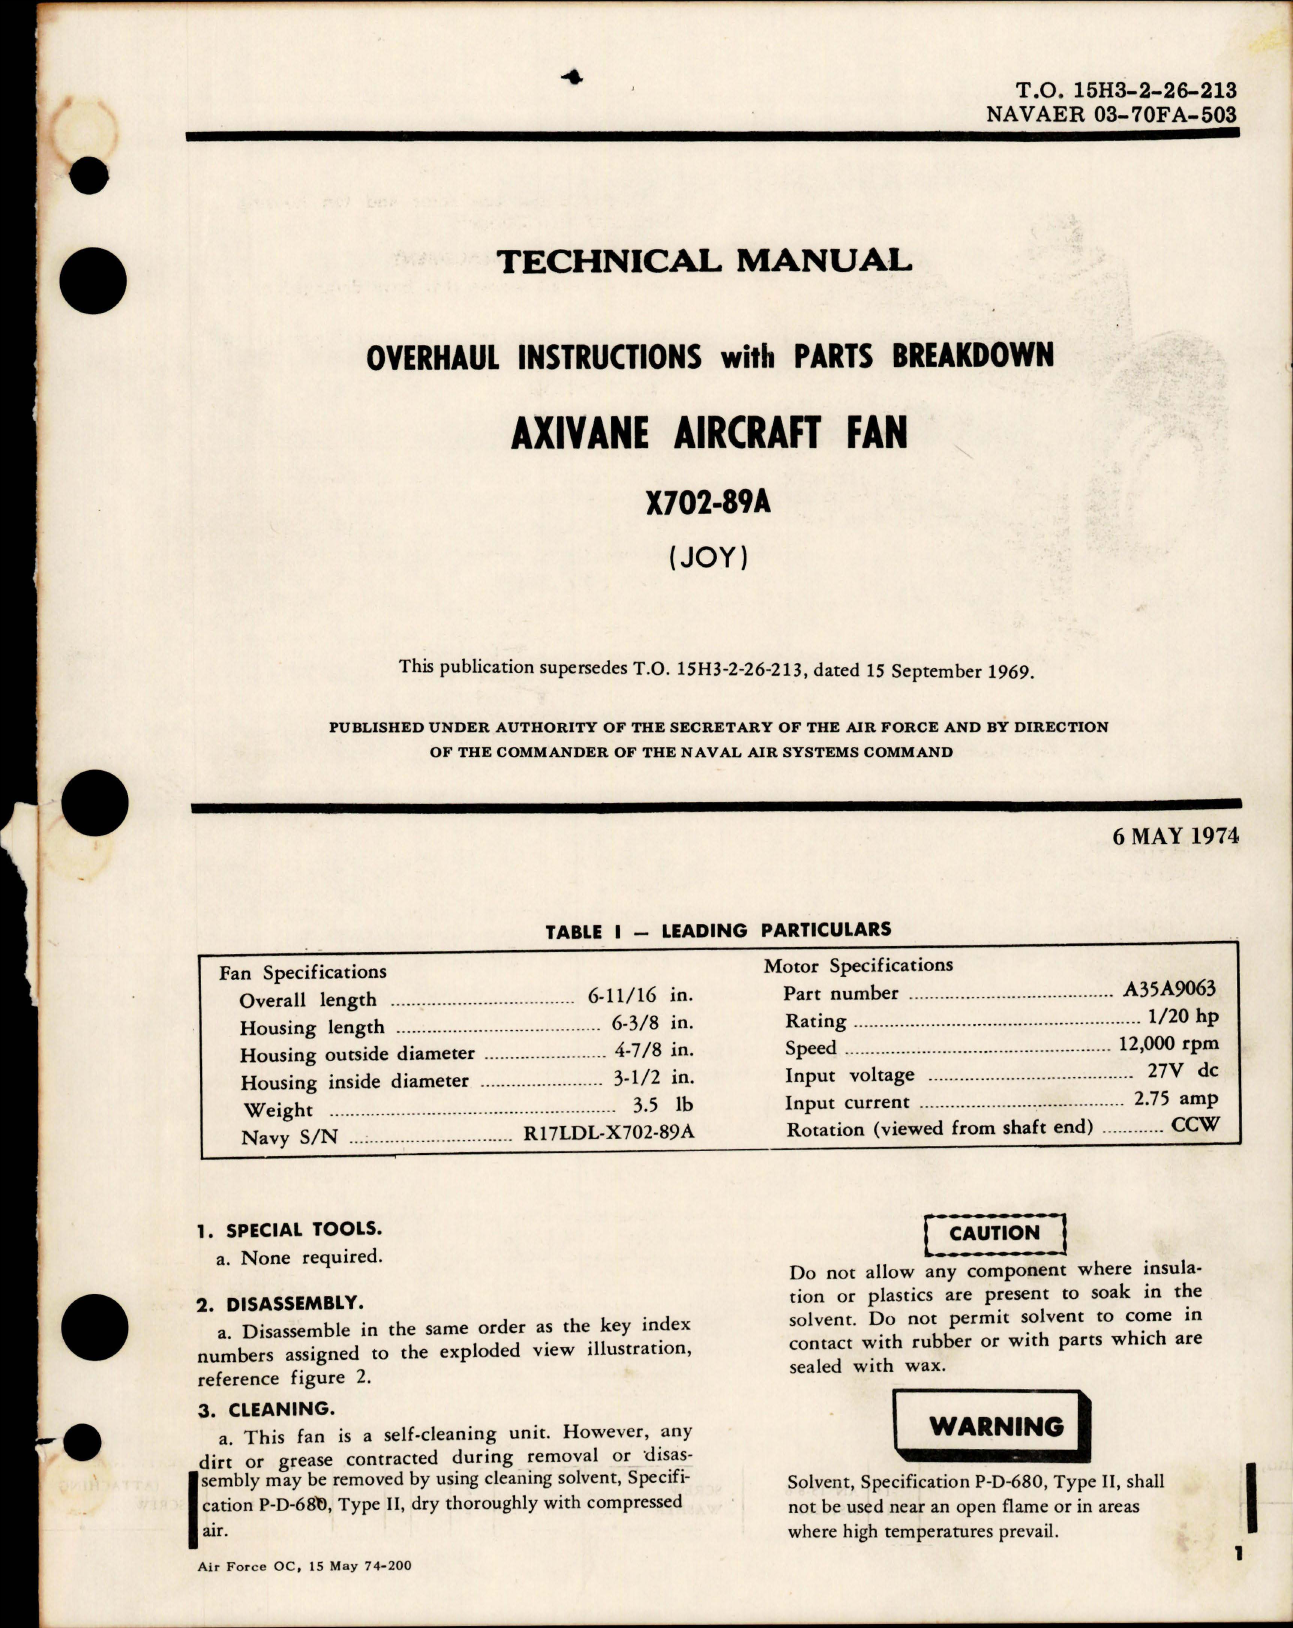 Sample page 1 from AirCorps Library document: Overhaul Instructions with Parts Breakdown for Axivane Aircraft Fan - X702-89A